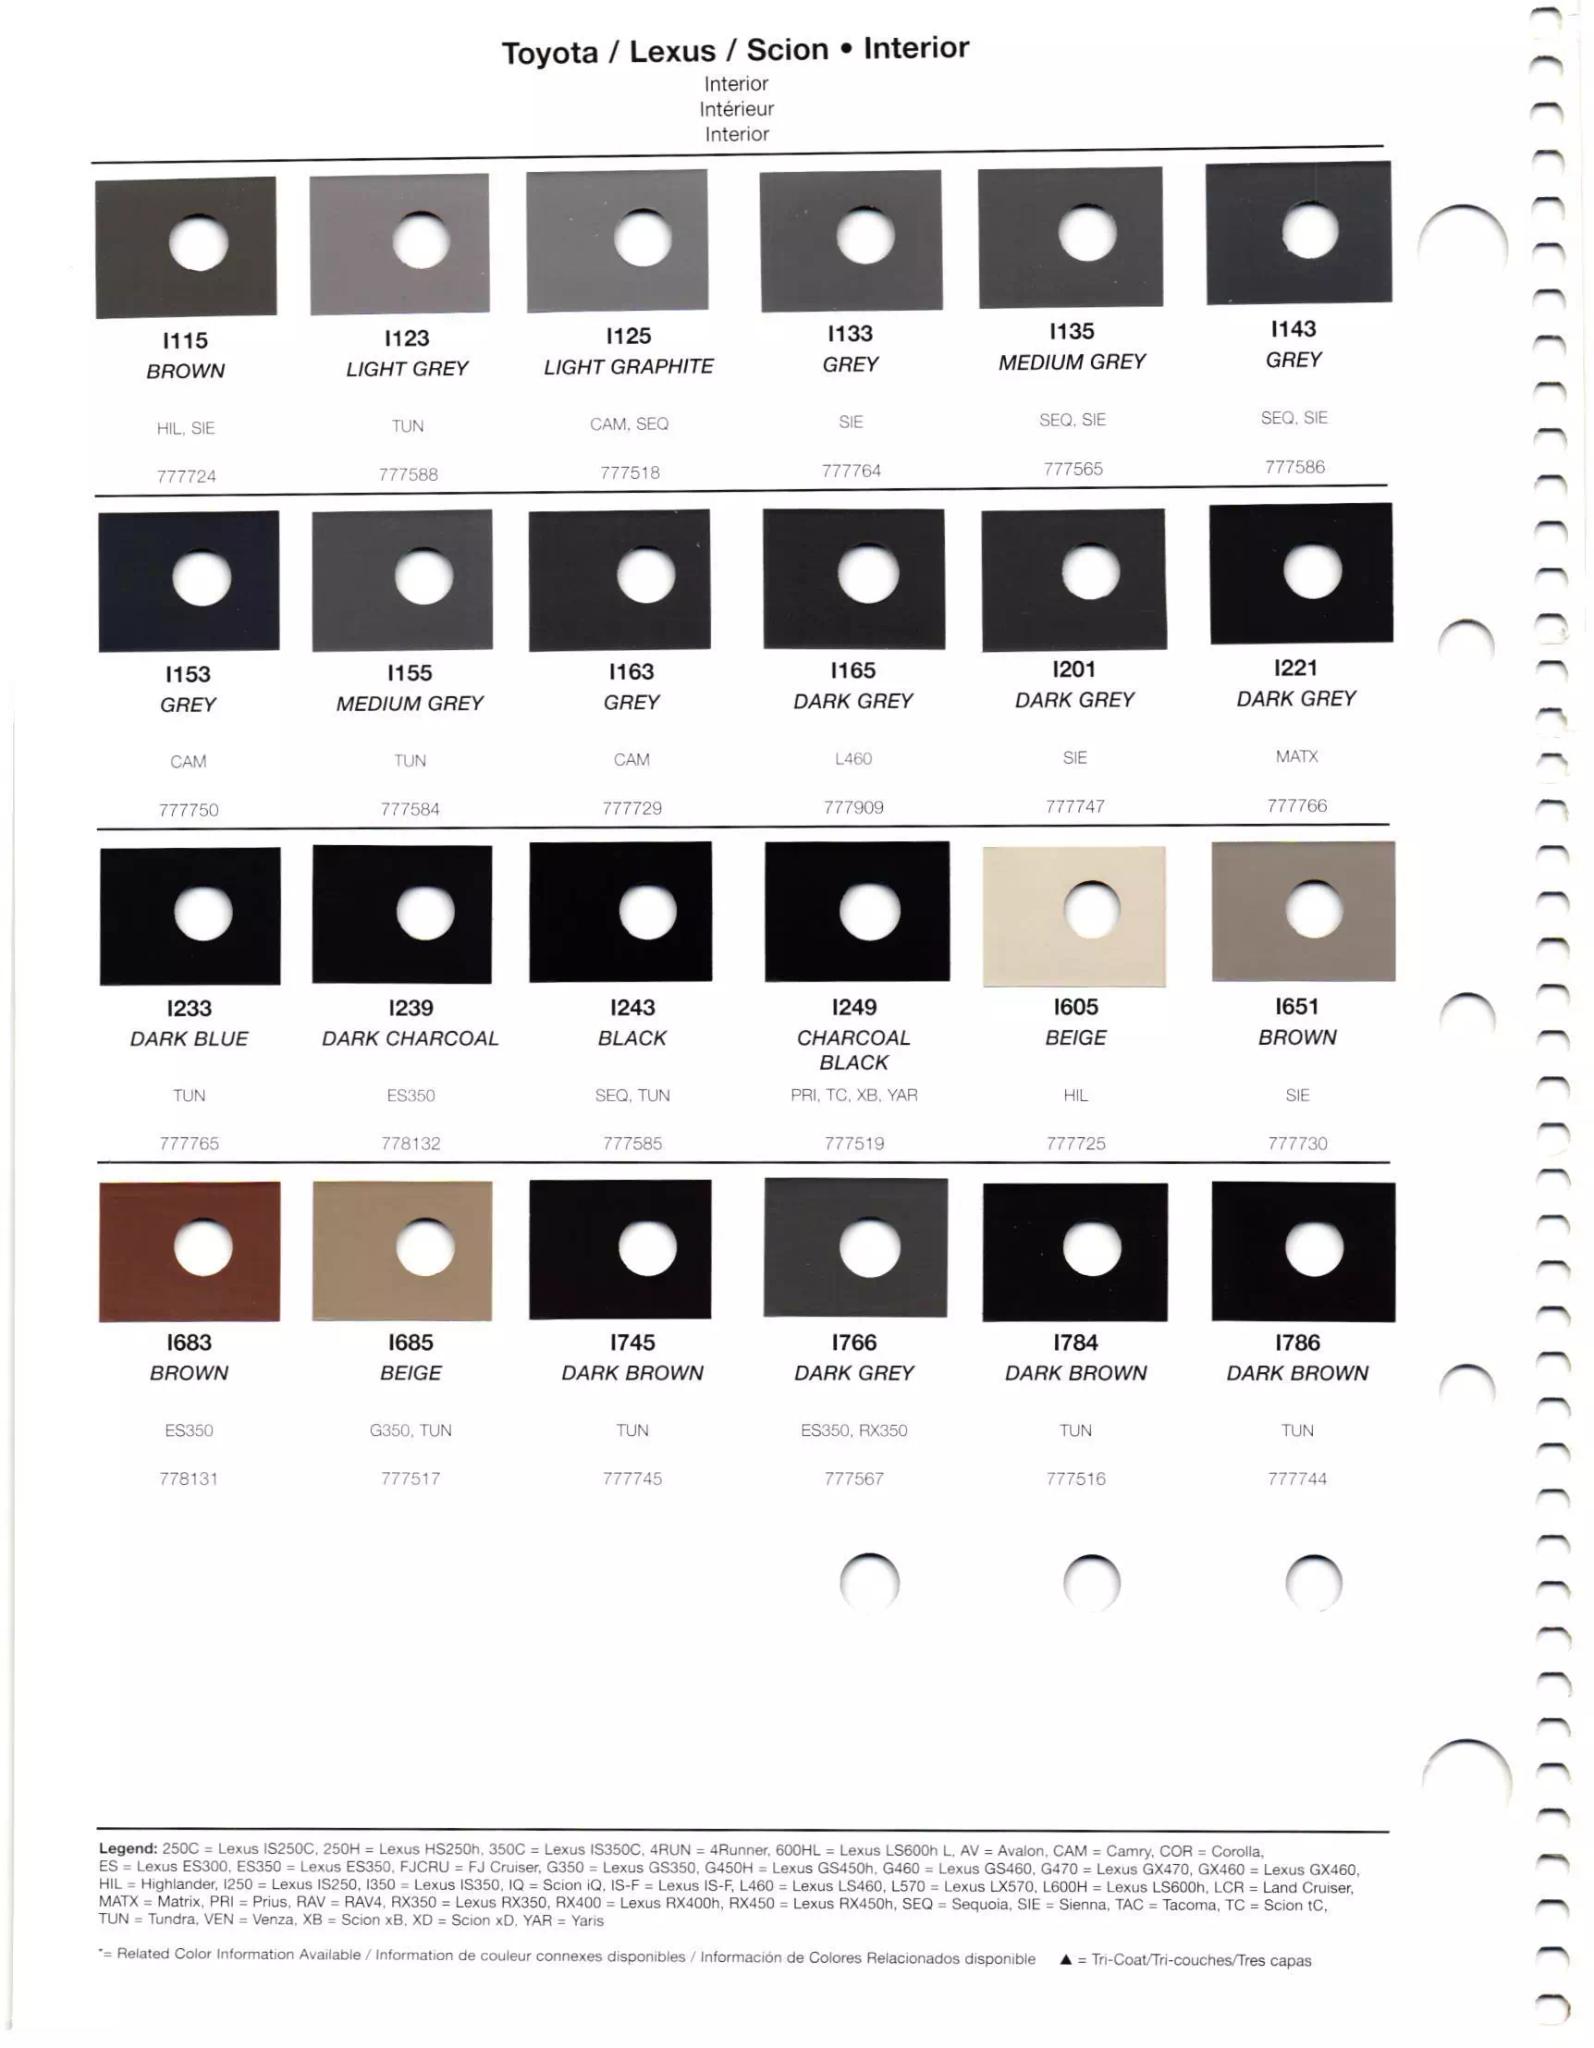 exterior, interior, wheel, and accent paint codes with paint chips used on toyota, lexus & scion vehicles